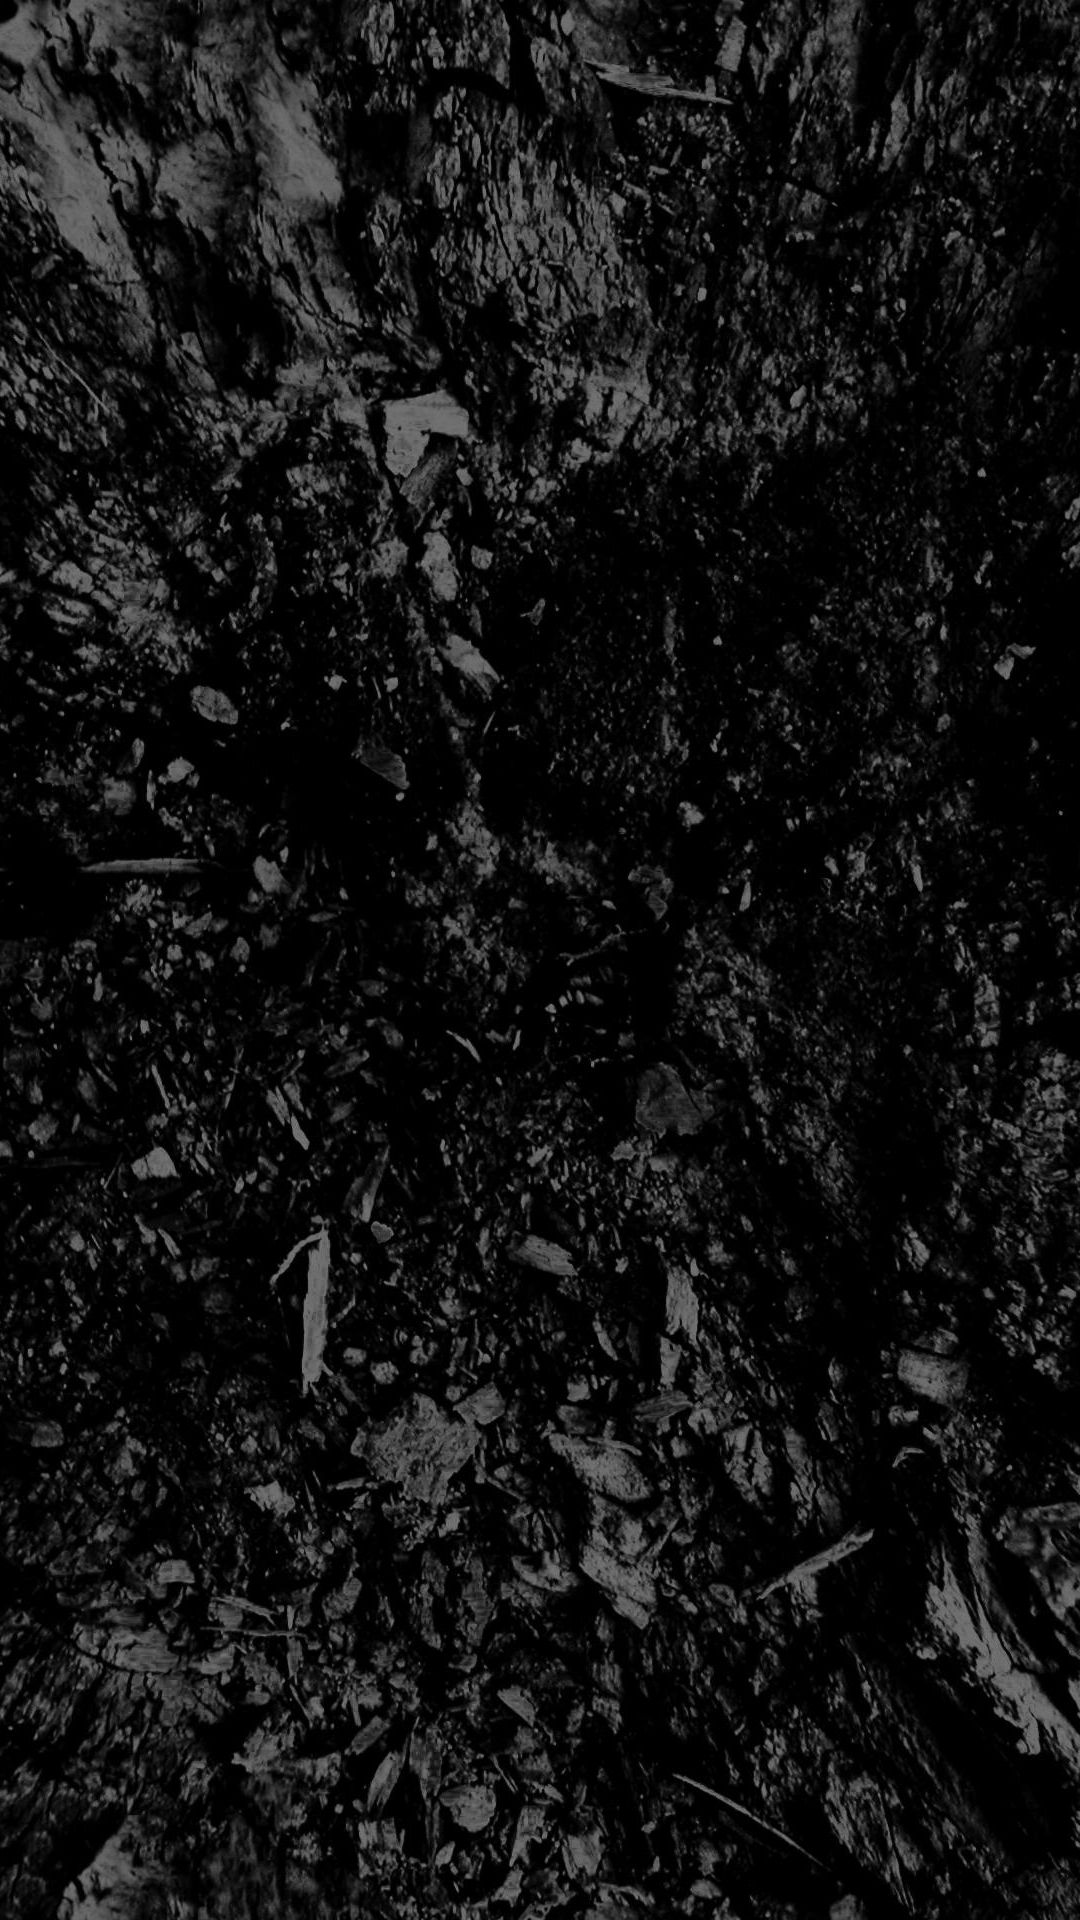 Download wallpaper 1080x1920 dark, black and white, abstract, black  background samsung galaxy s4, s5, note, sony xperia z, z1, z2, z3, htc one,  lenovo vibe hd background